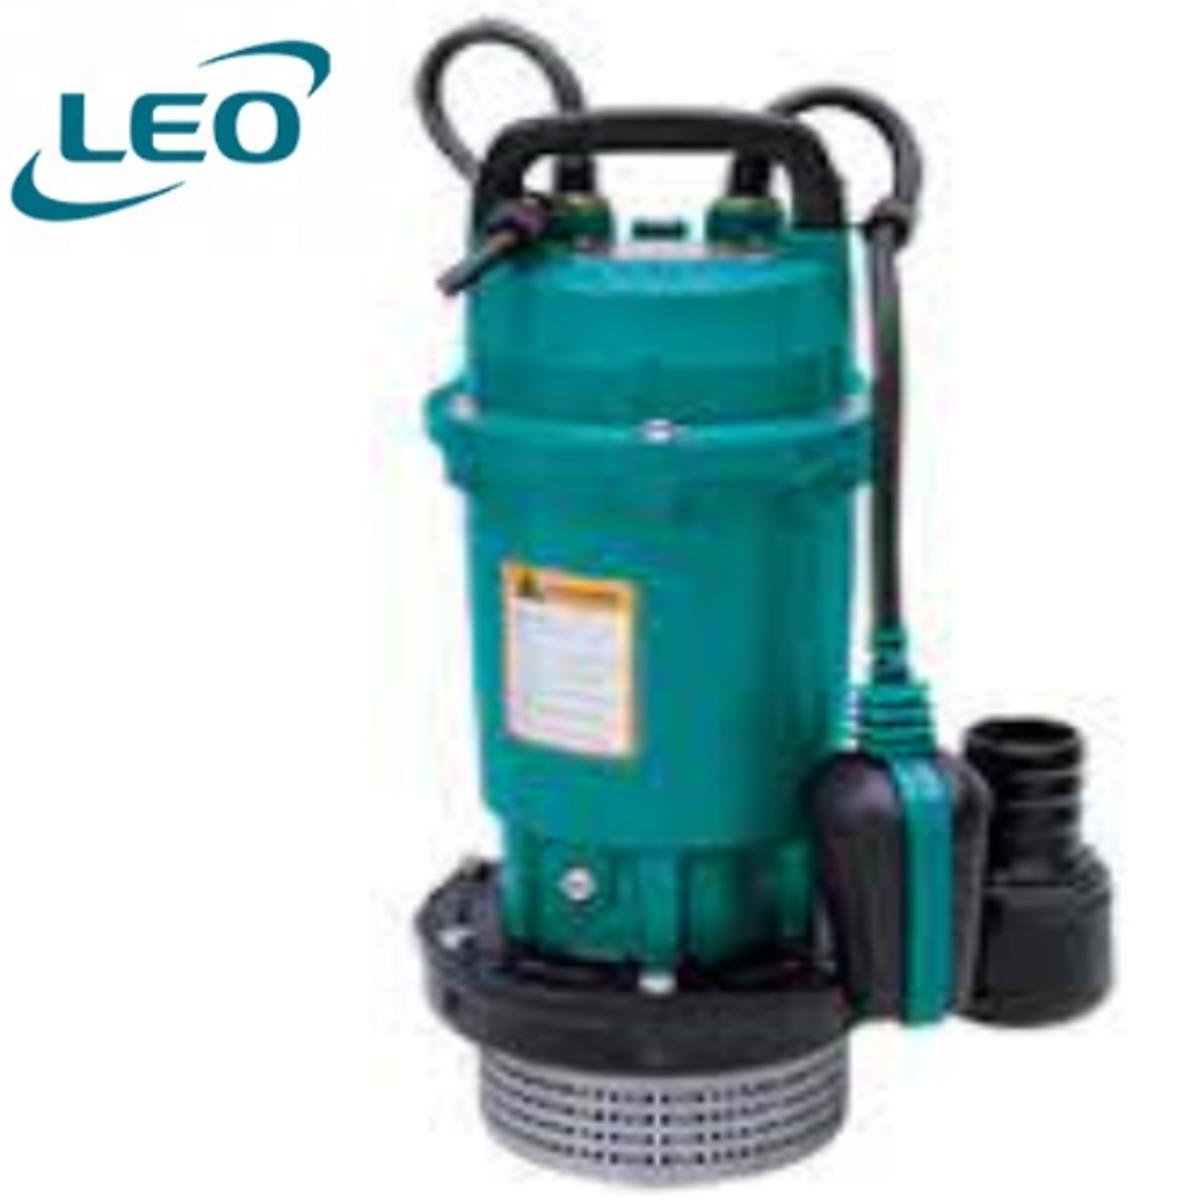 LEO - QDX-15-10-0.75LA - 750 W - 1 HP - HIGH Flow ALUMUNIUM BODY Submersible Pump With FLOAT SWITCH FOR AUTOMATIC OPERATION - European STANDARD Water Pump